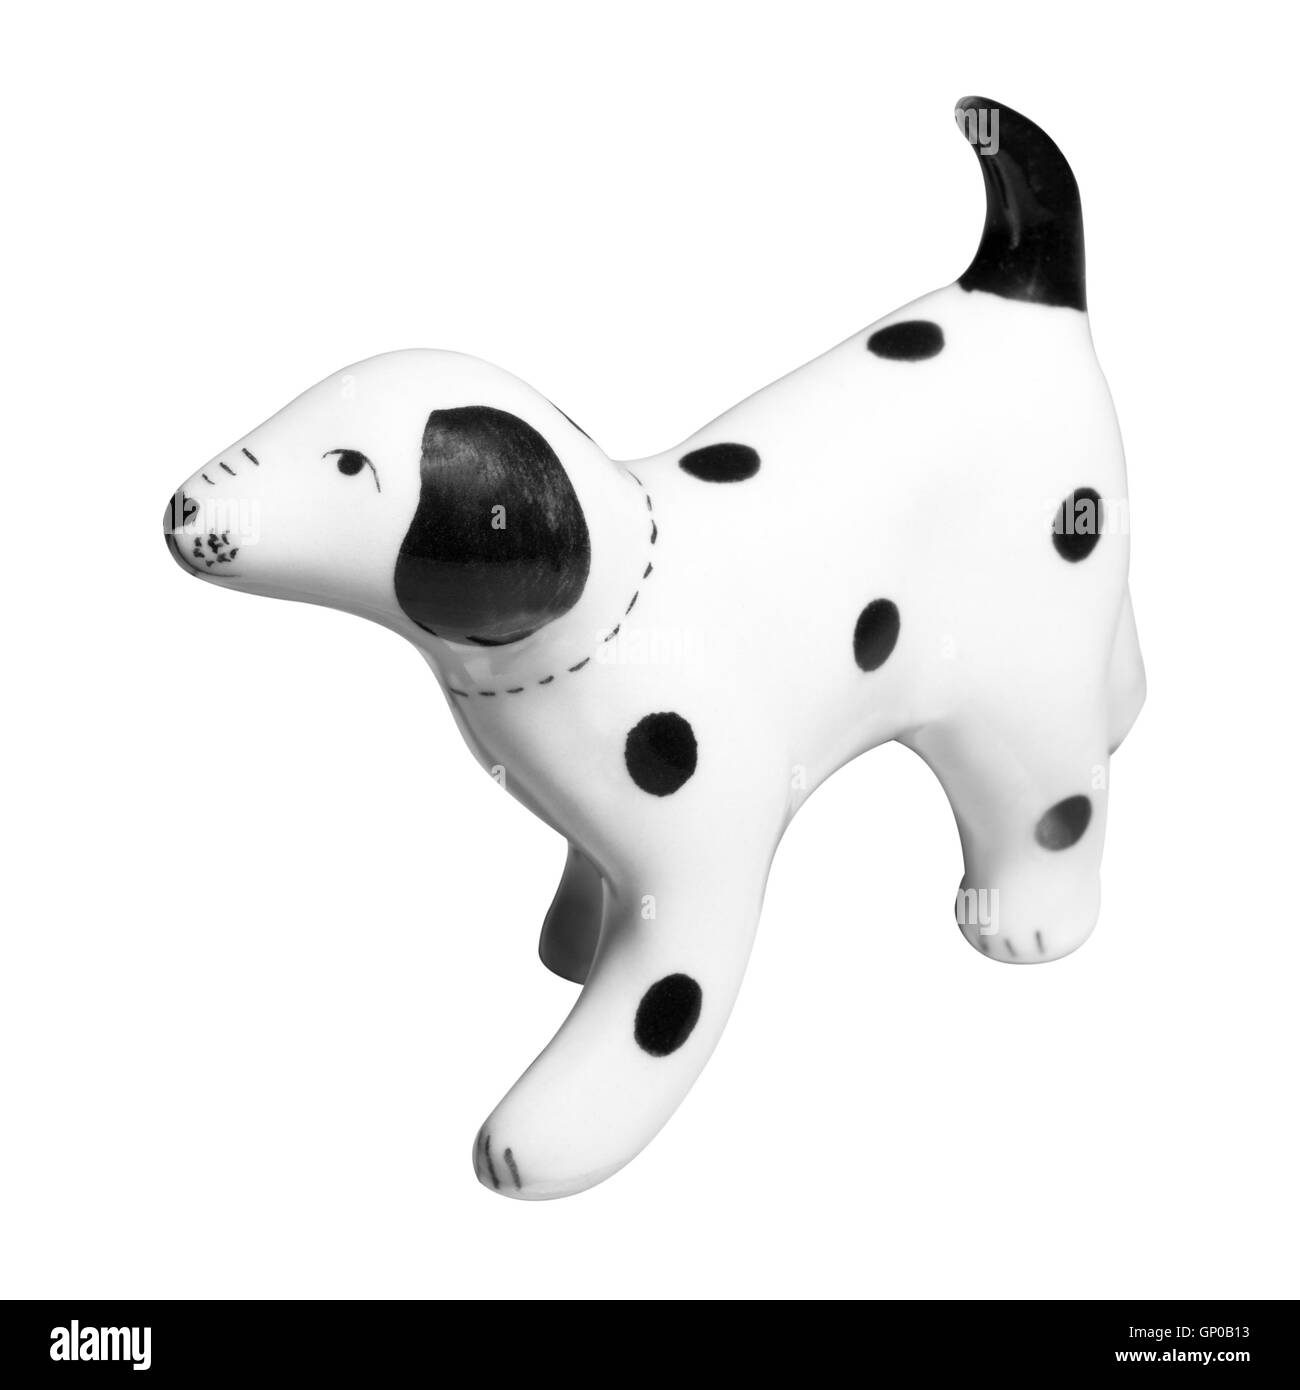 Dalmatian Dog ceramic figurine, isolated on white with clipping path. Stock Photo